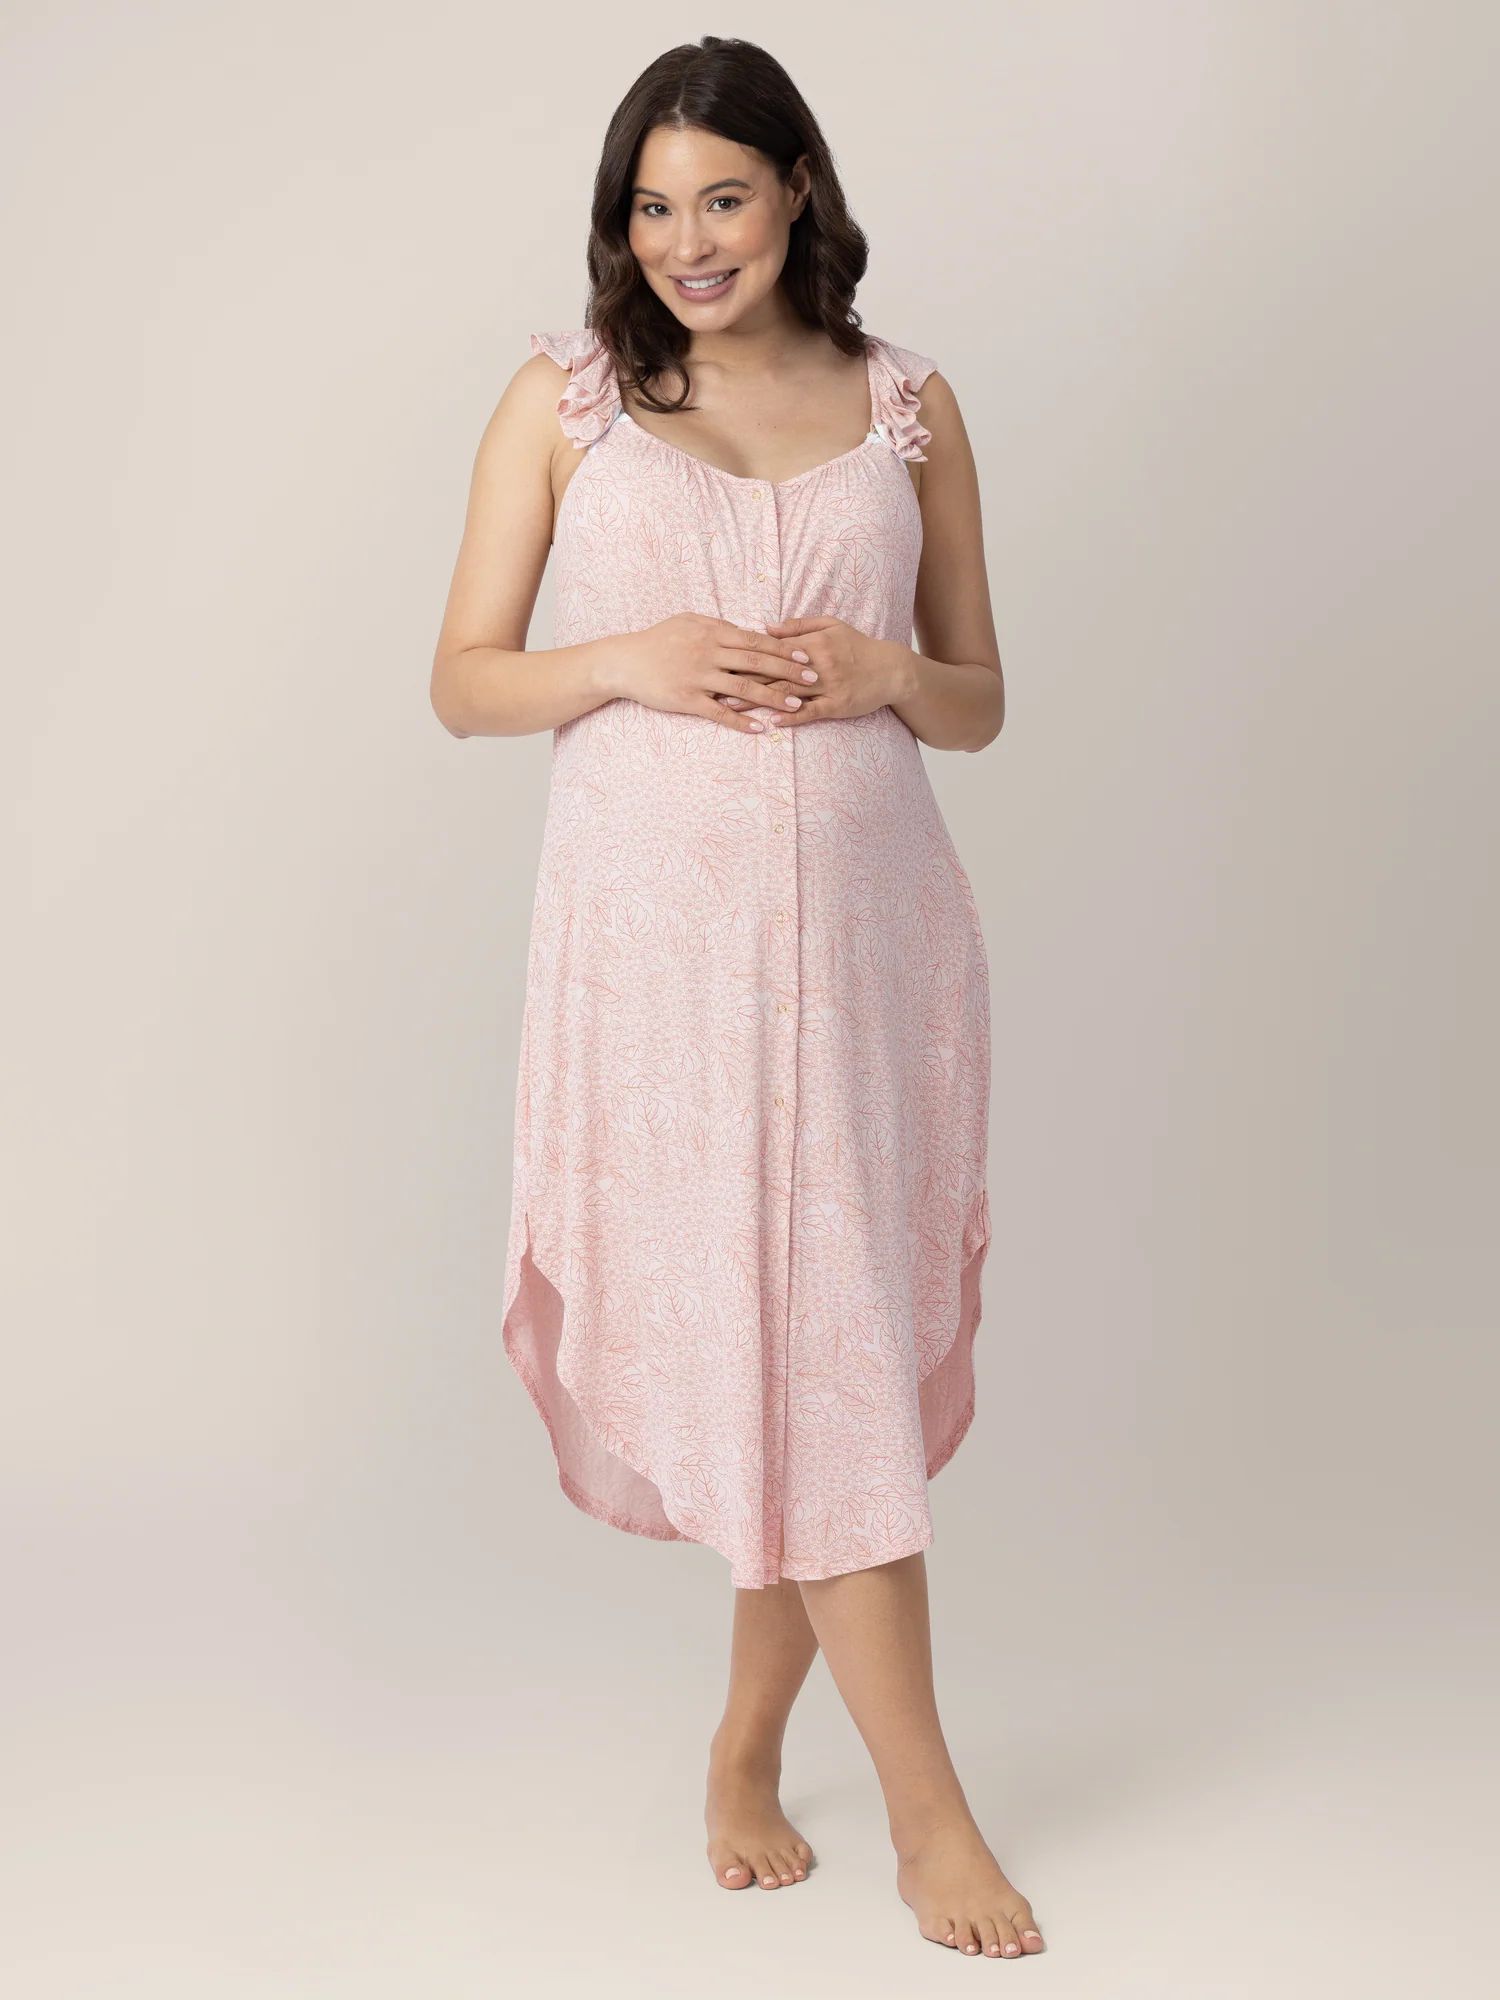 Ruffle Strap Labor & Delivery Gown | Pink Hydrangea - Kindred Bravely | Kindred Bravely